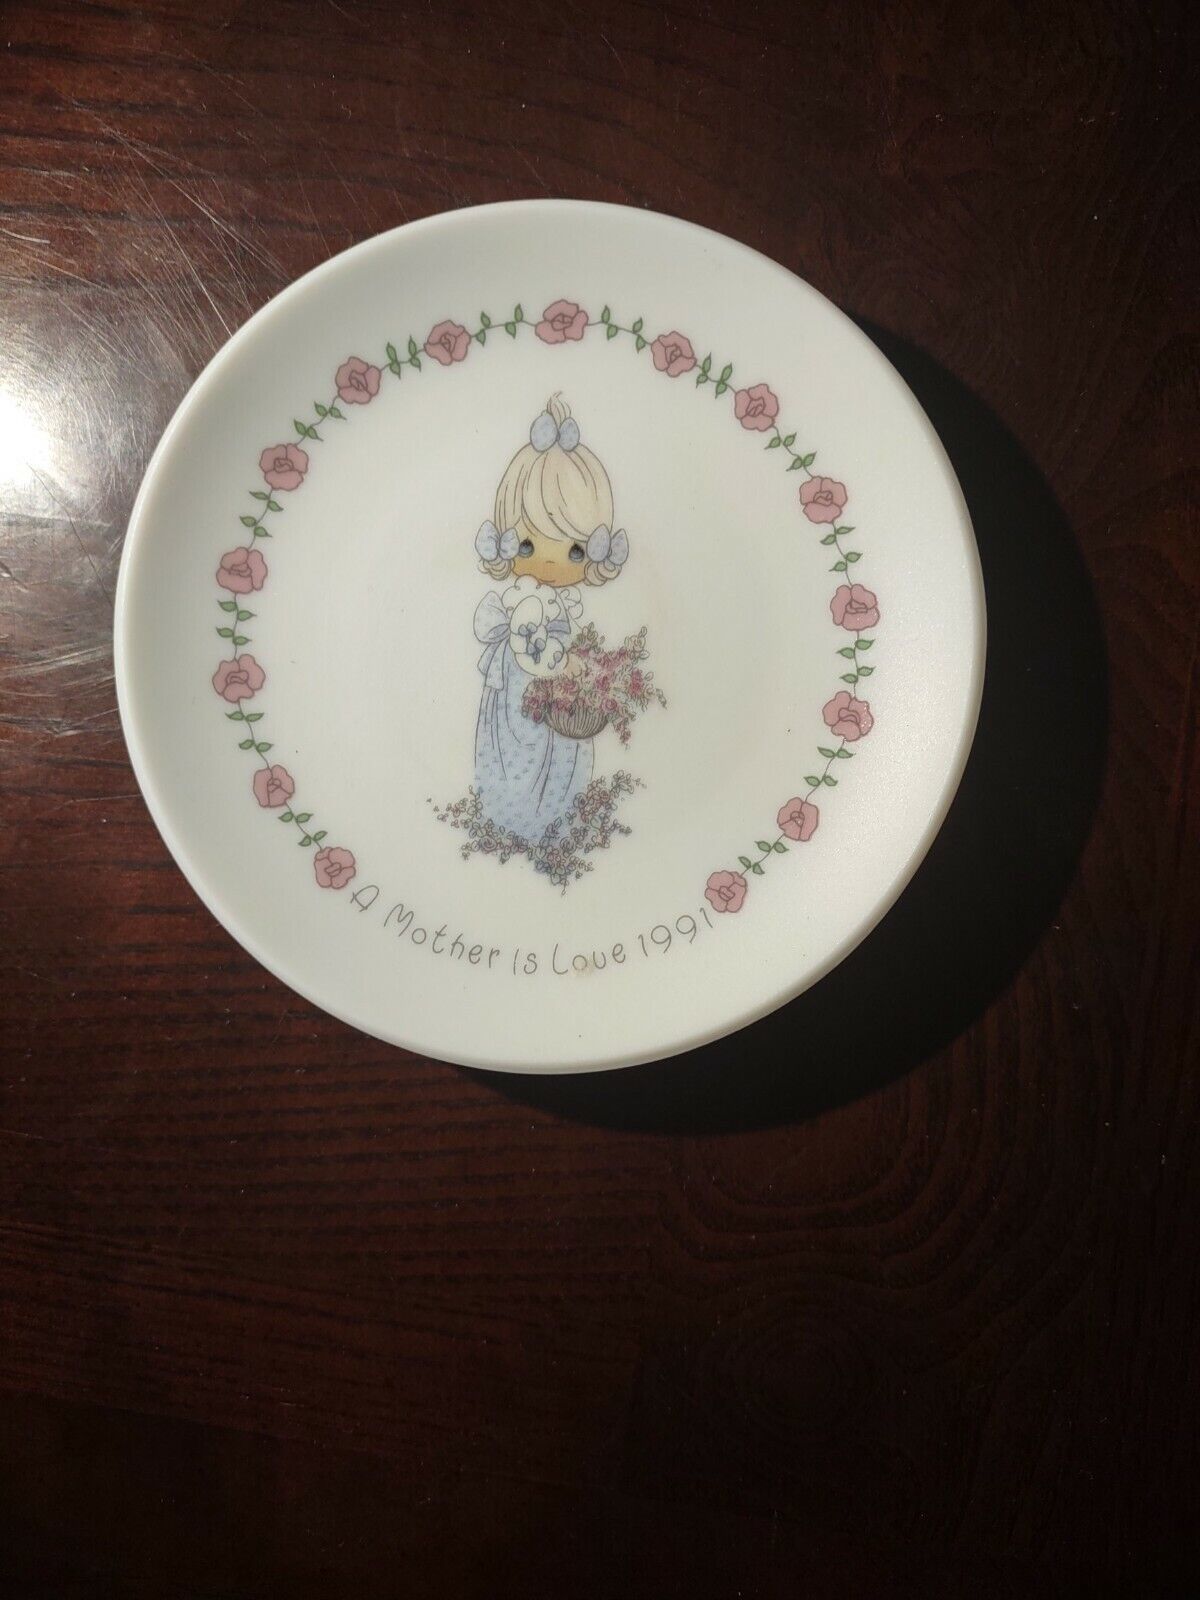 Primary image for A Mother Is Love 1991 Precious Moments tea saucer